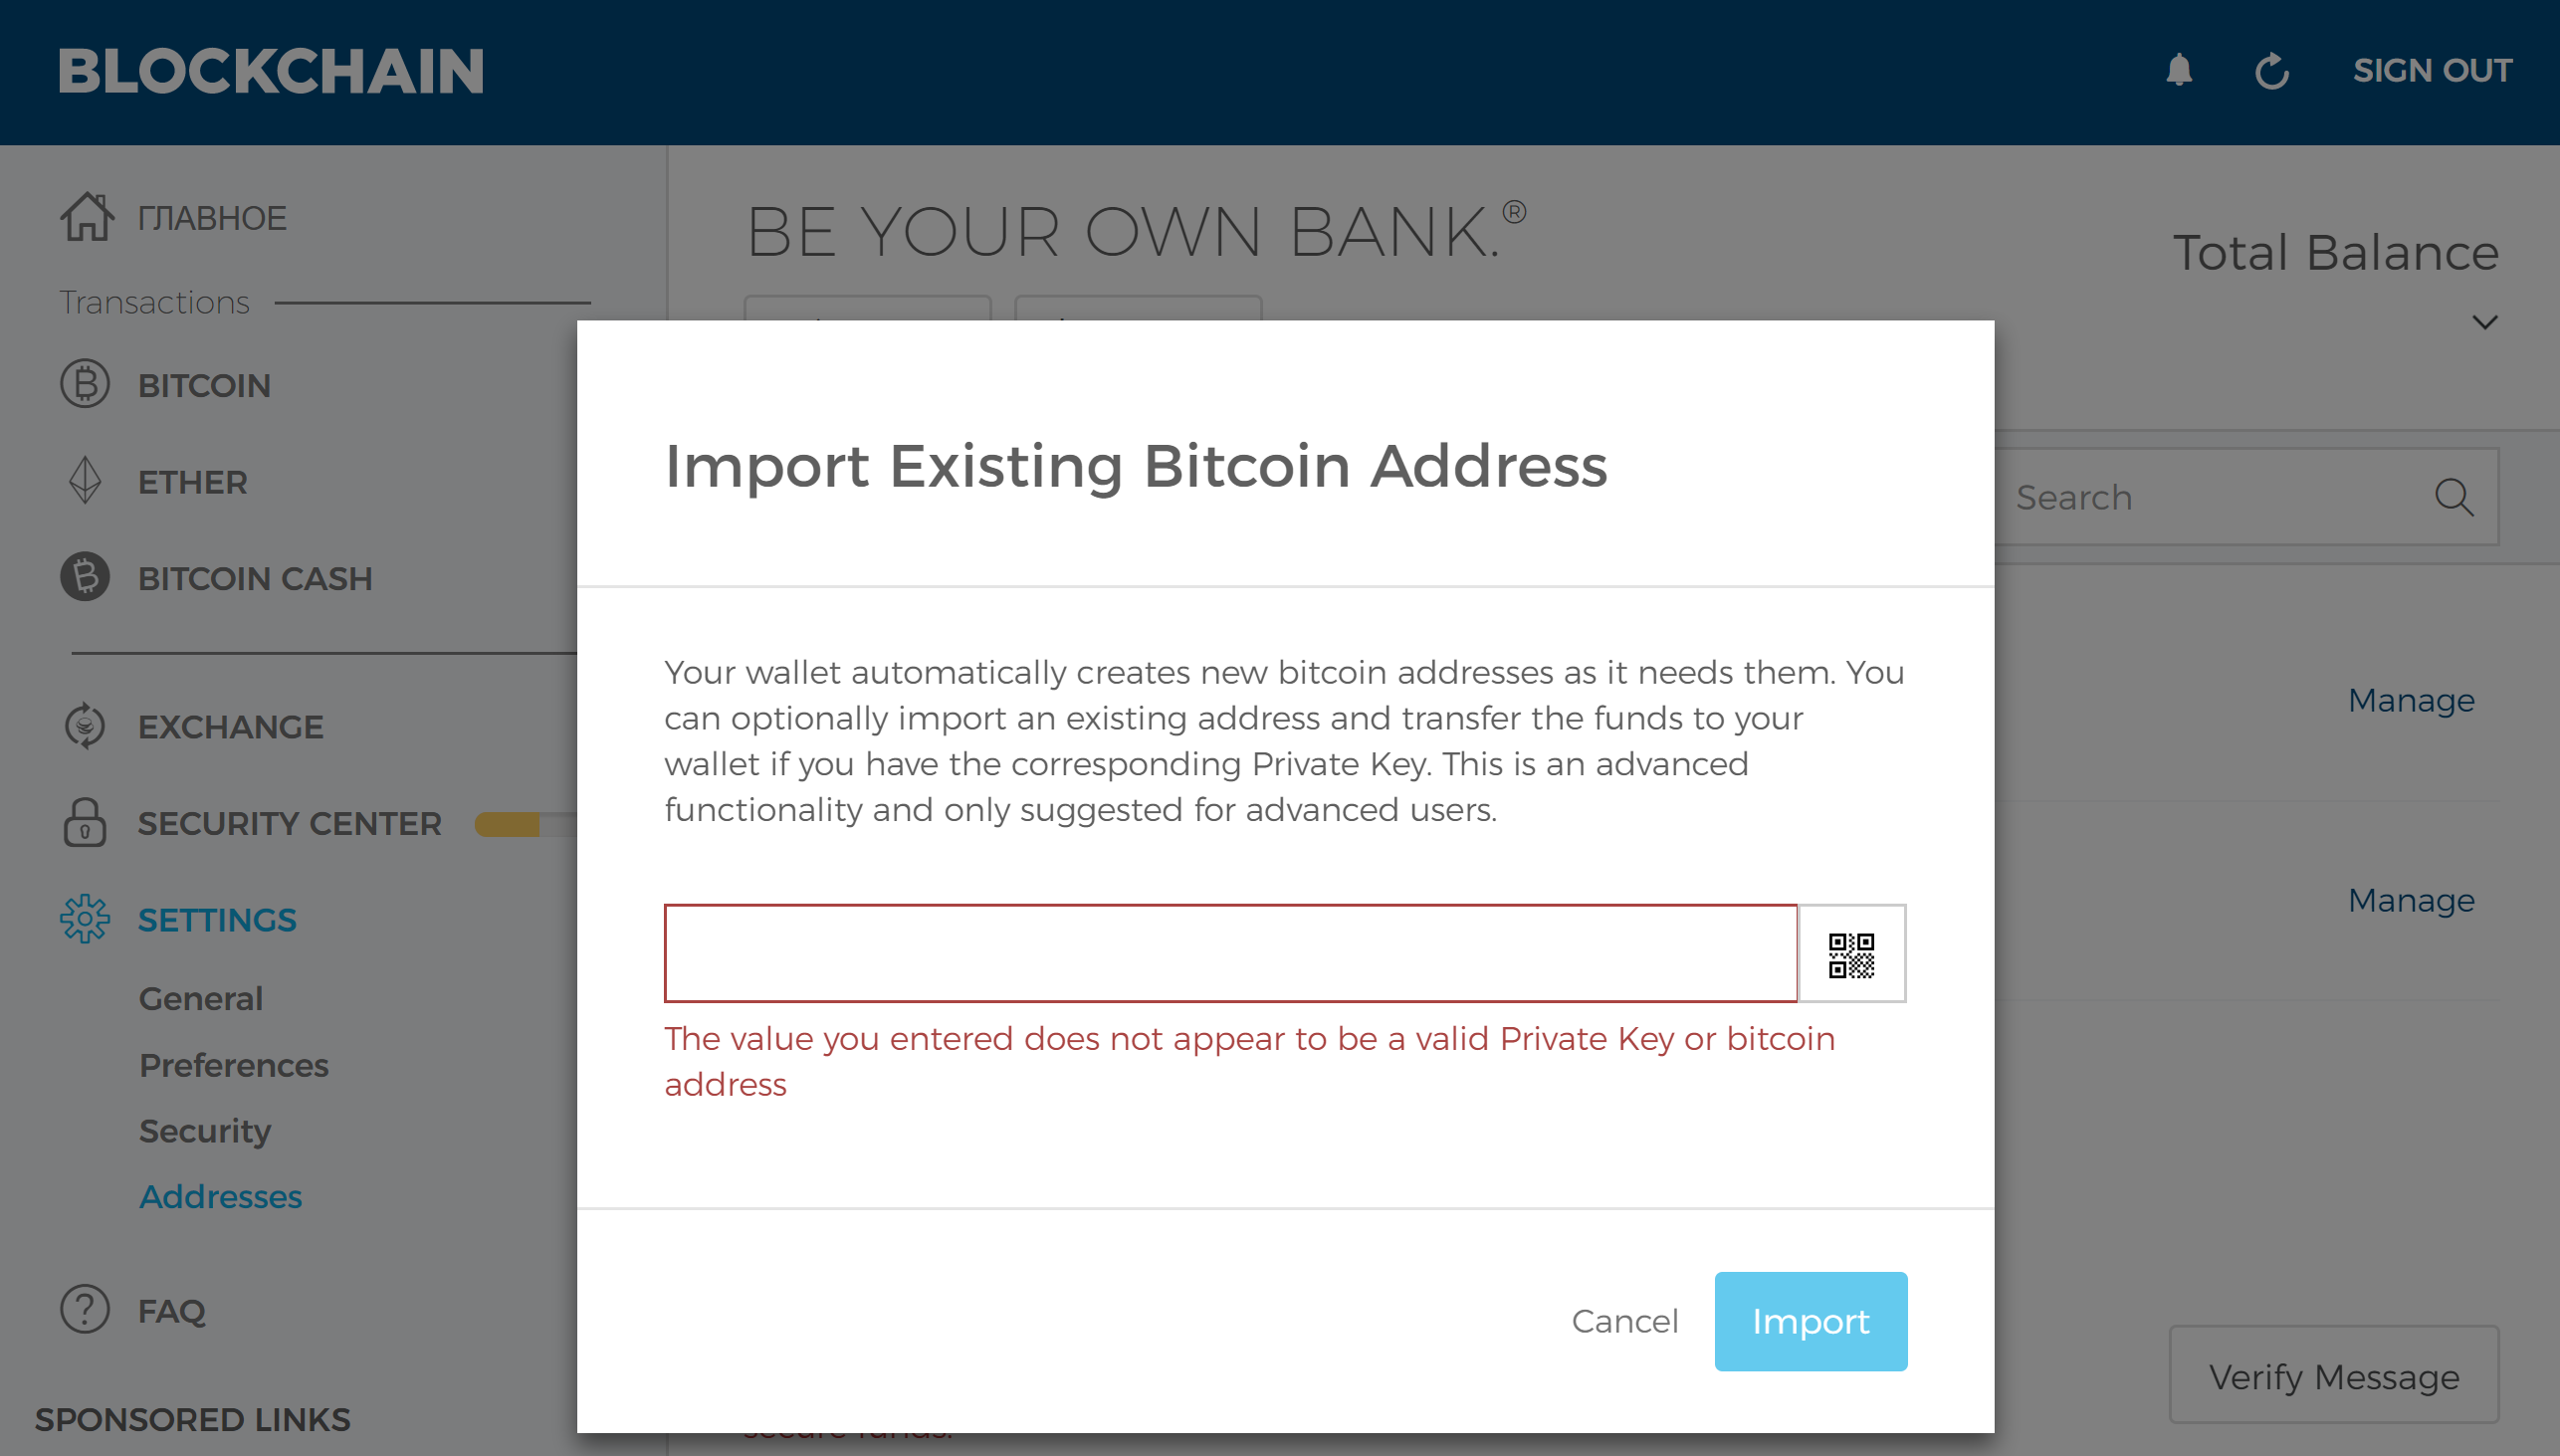 How to import keys to bitcoind (Bitcoin QT)?